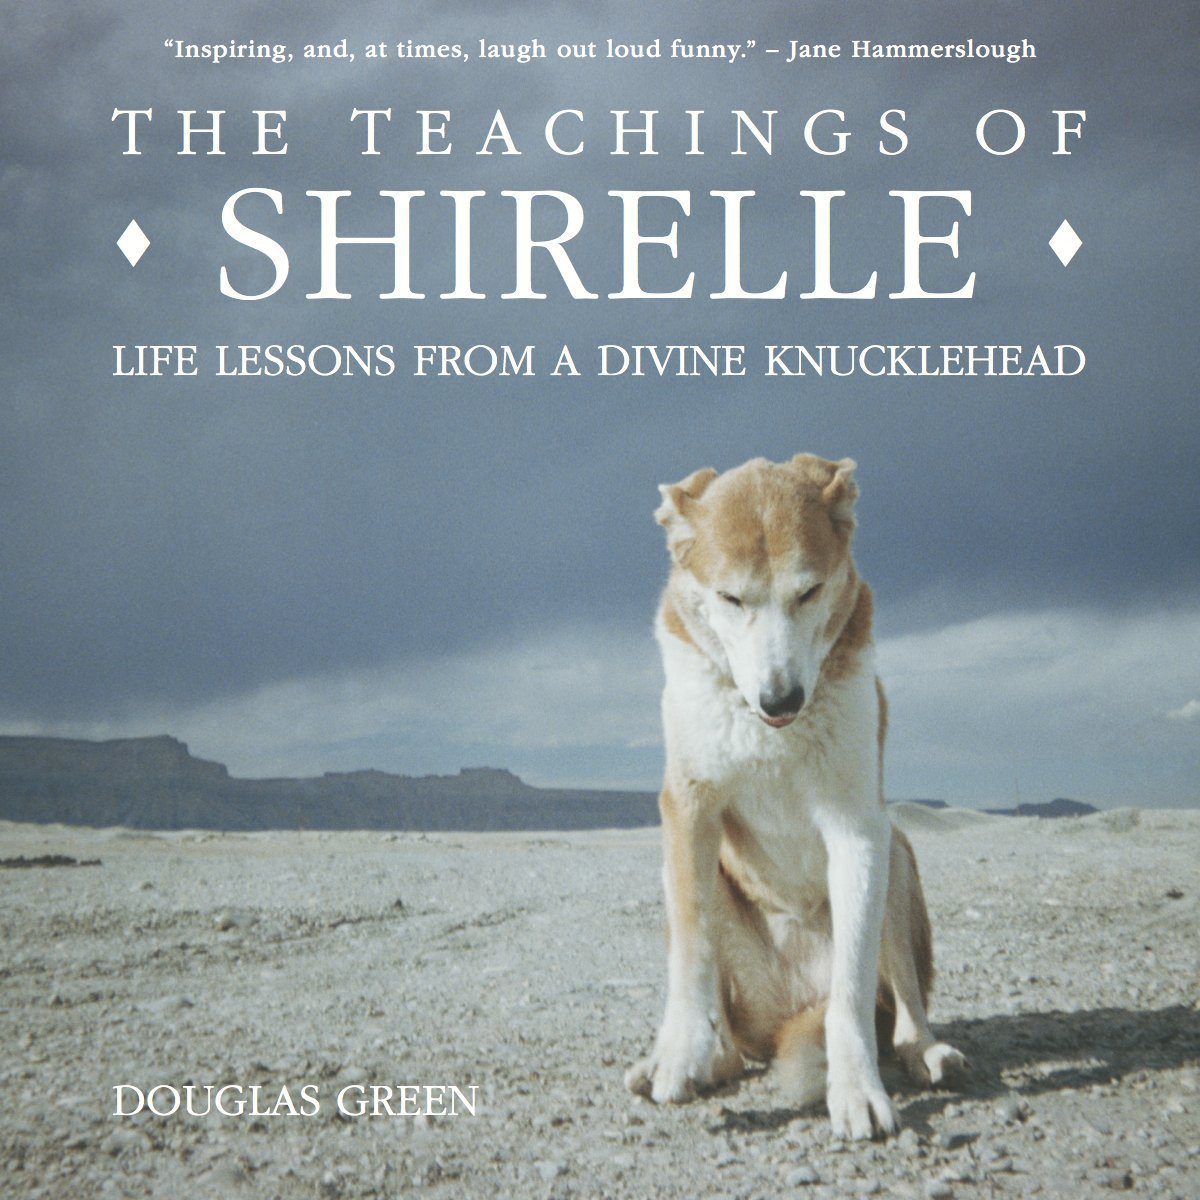 The Teachings of Shirelle: Life Lessons from a Divine Knucklehead http://amzn.to/1POLzuj